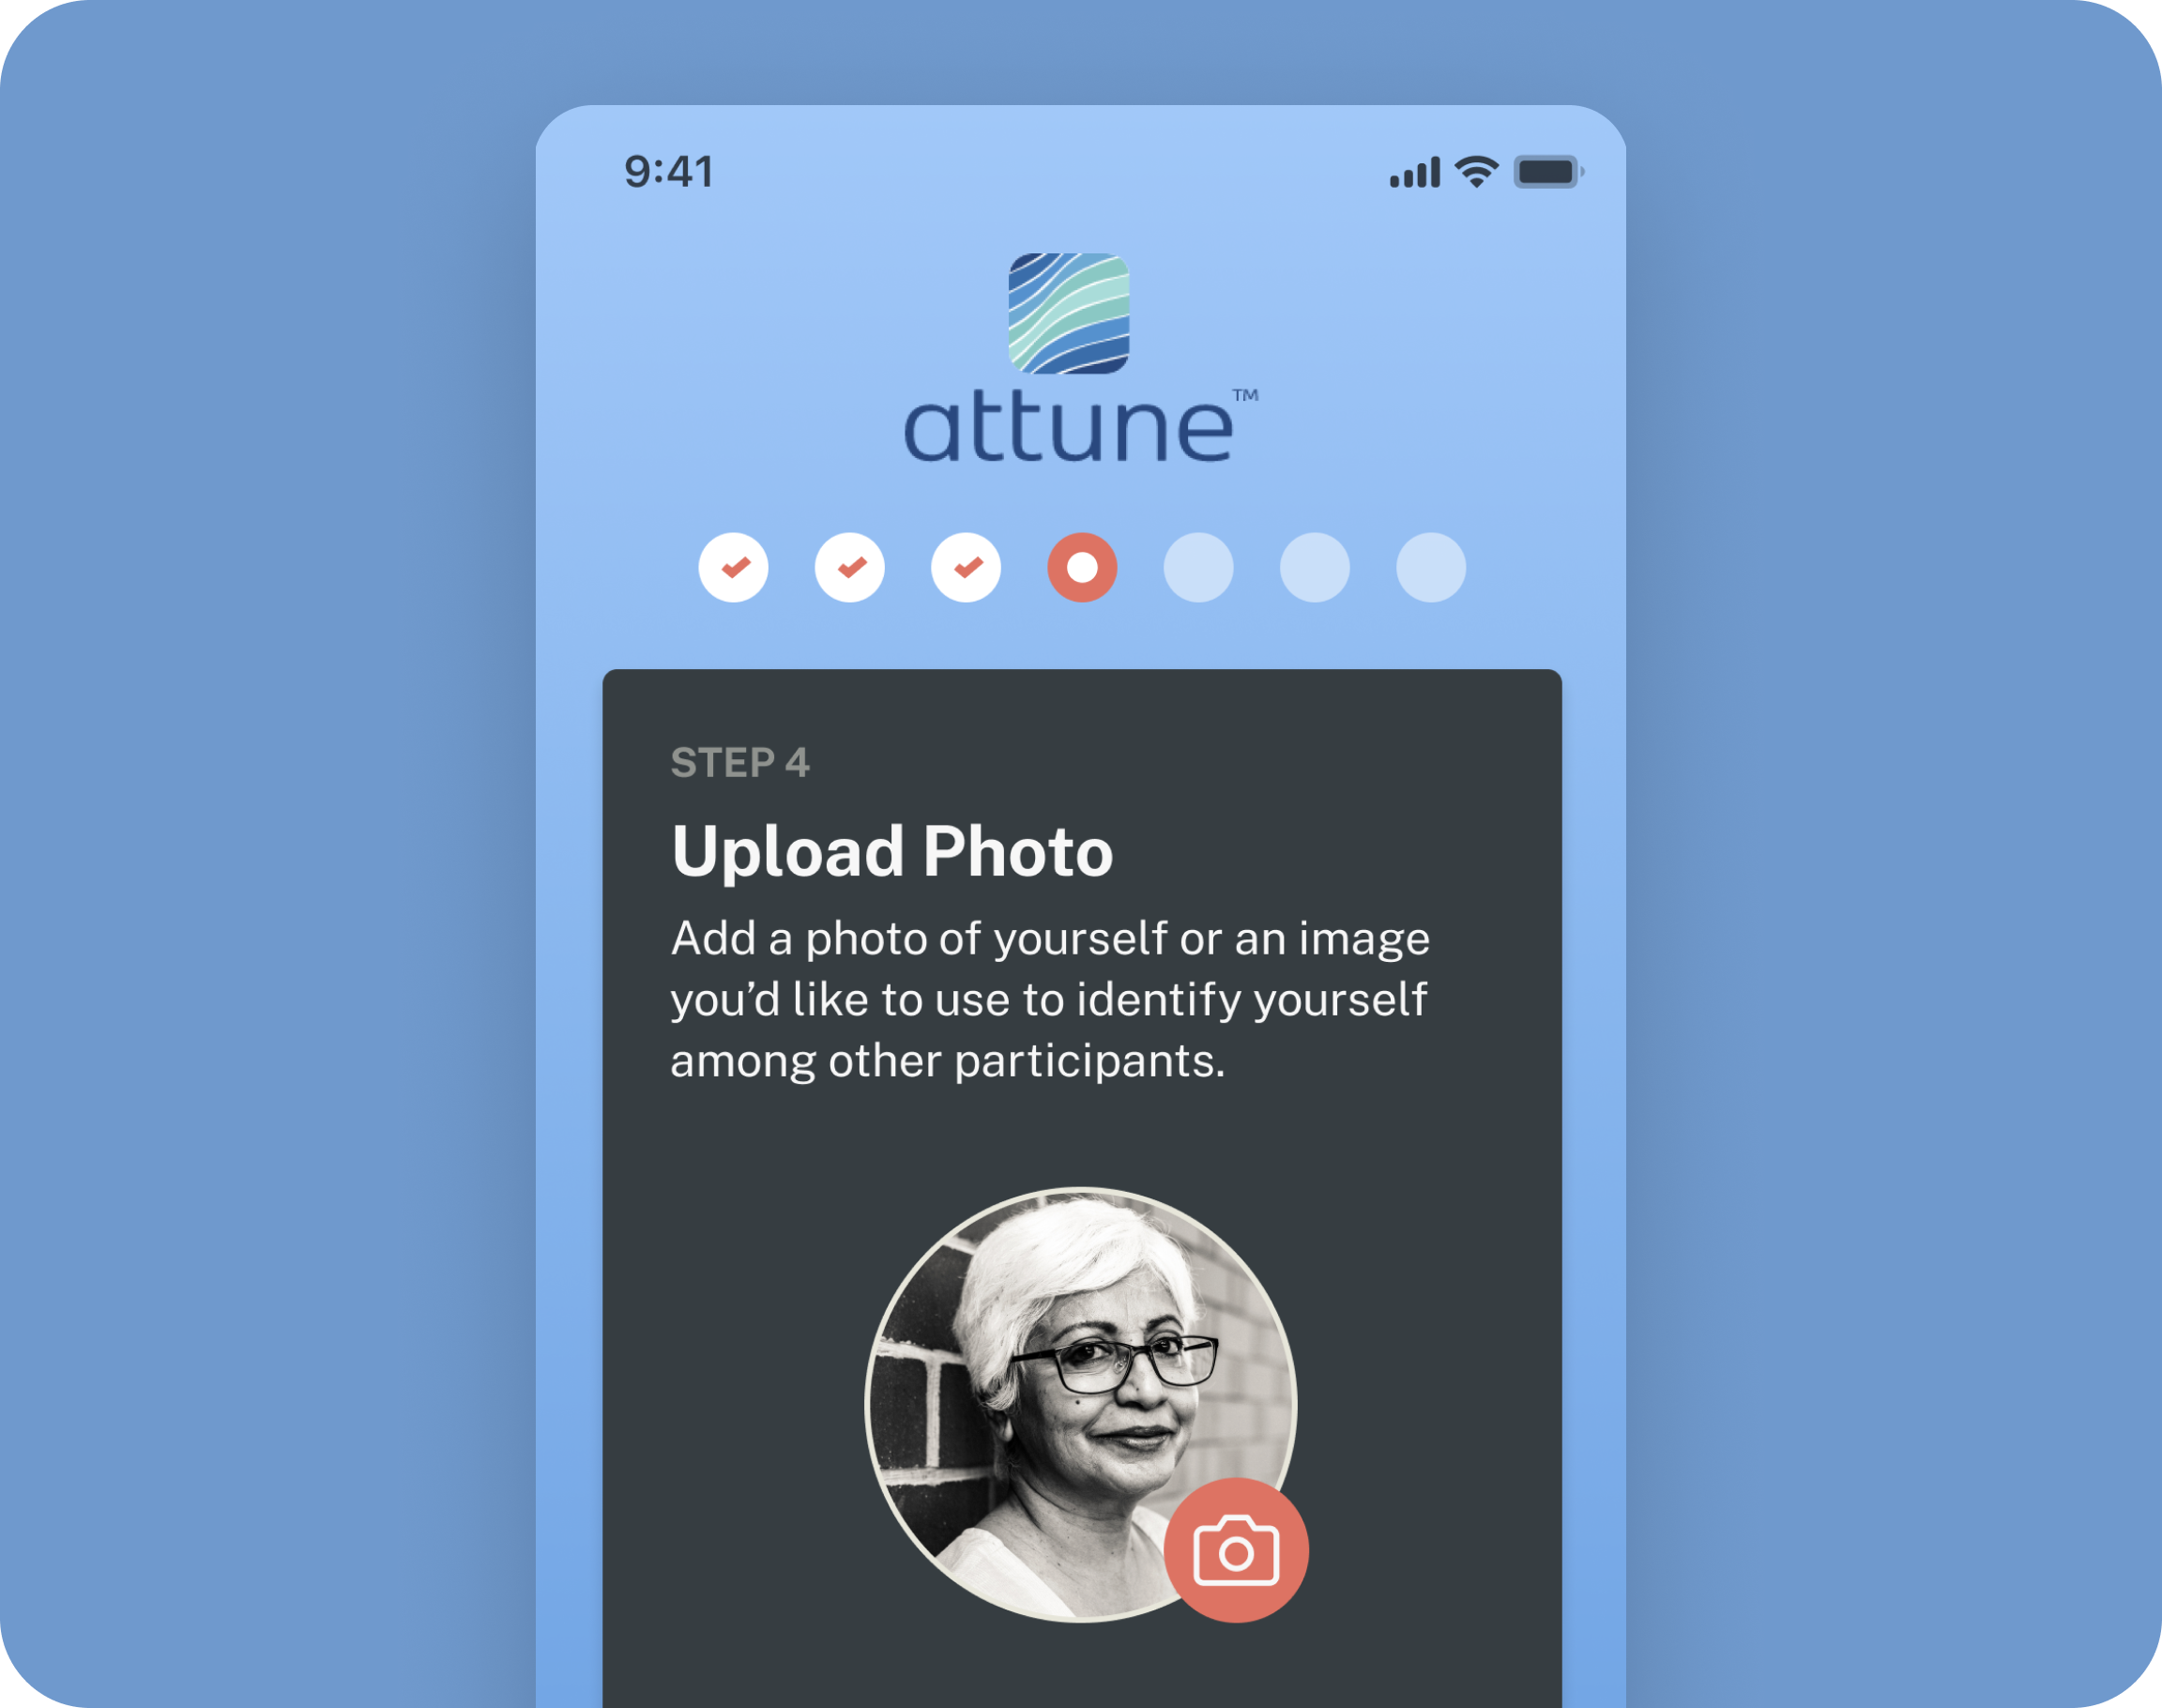 Onboarding screen from attune mobile app directing user to upload photo.